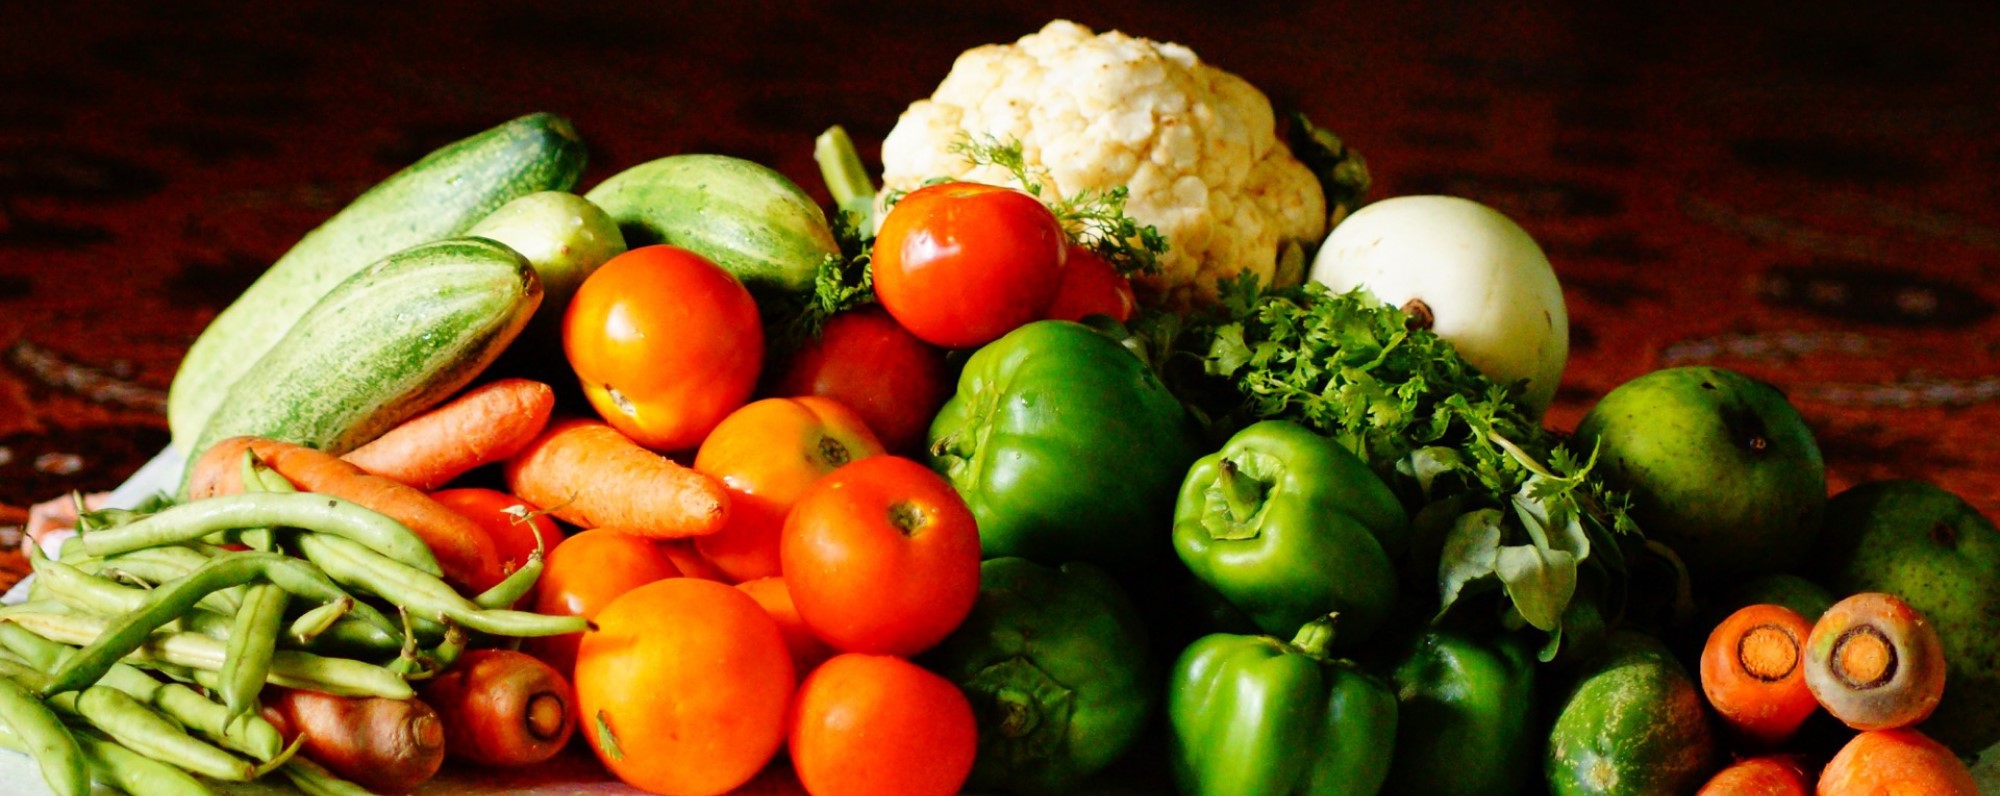 A collection of fresh vegetables